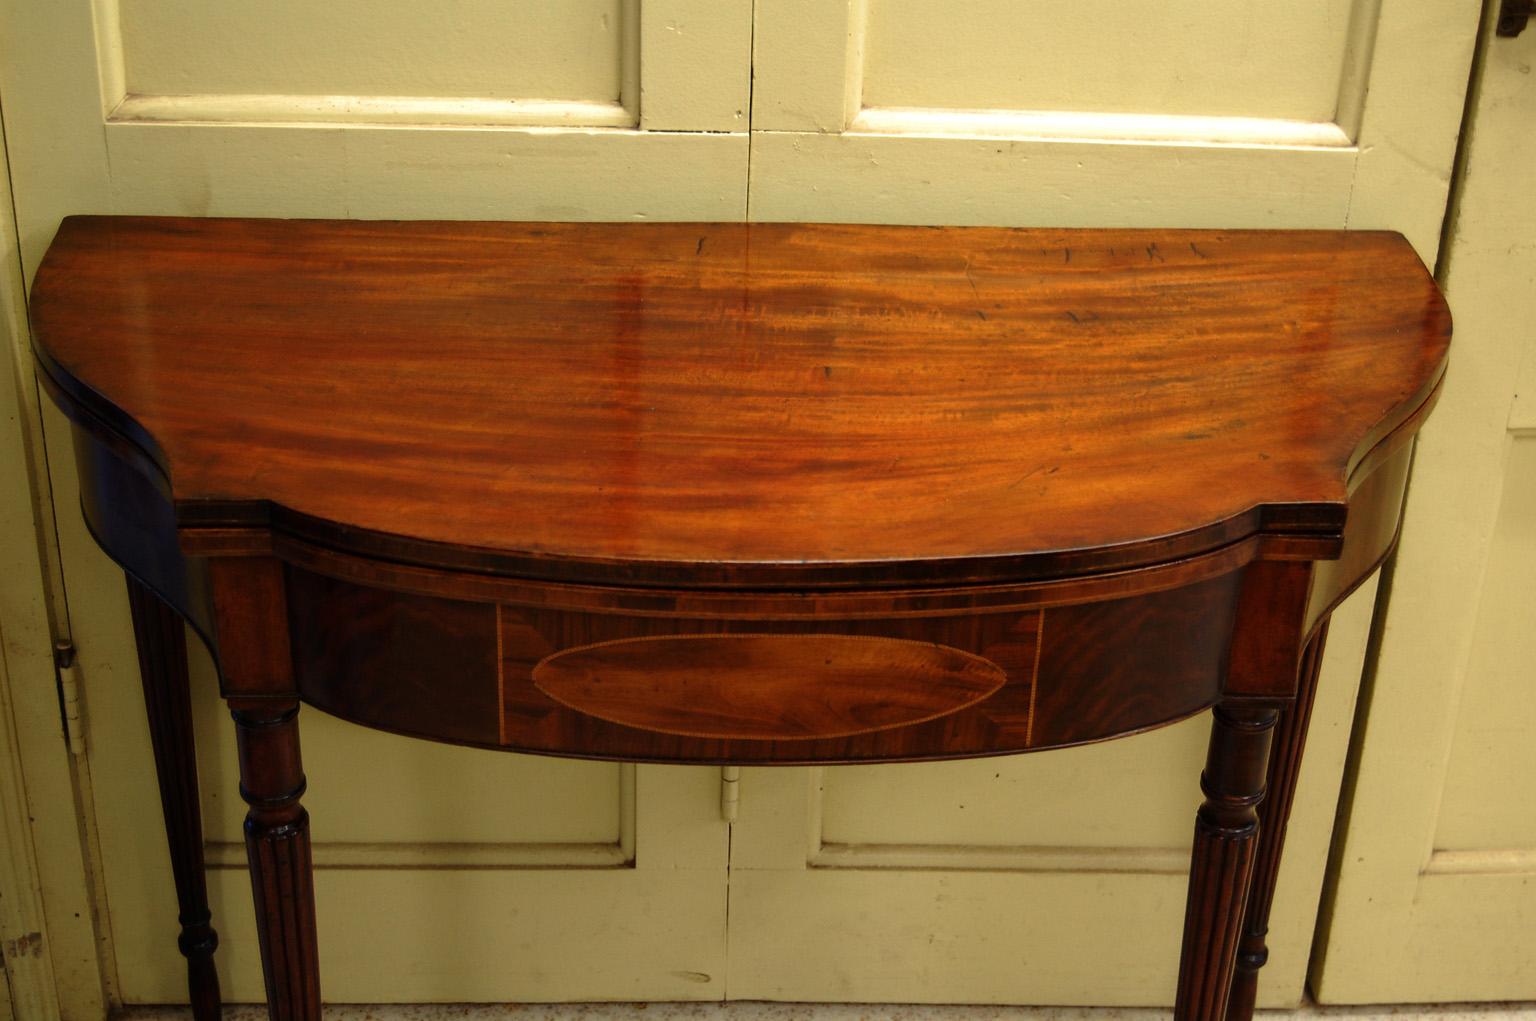   American Federal mahogany serpentine tea table with reeded legs, oval holly inlay with intricate stringing to skirt, stringing to the edge of the top.  The tapered reeded legs have a lower collar and below that instead of a straight taper for the